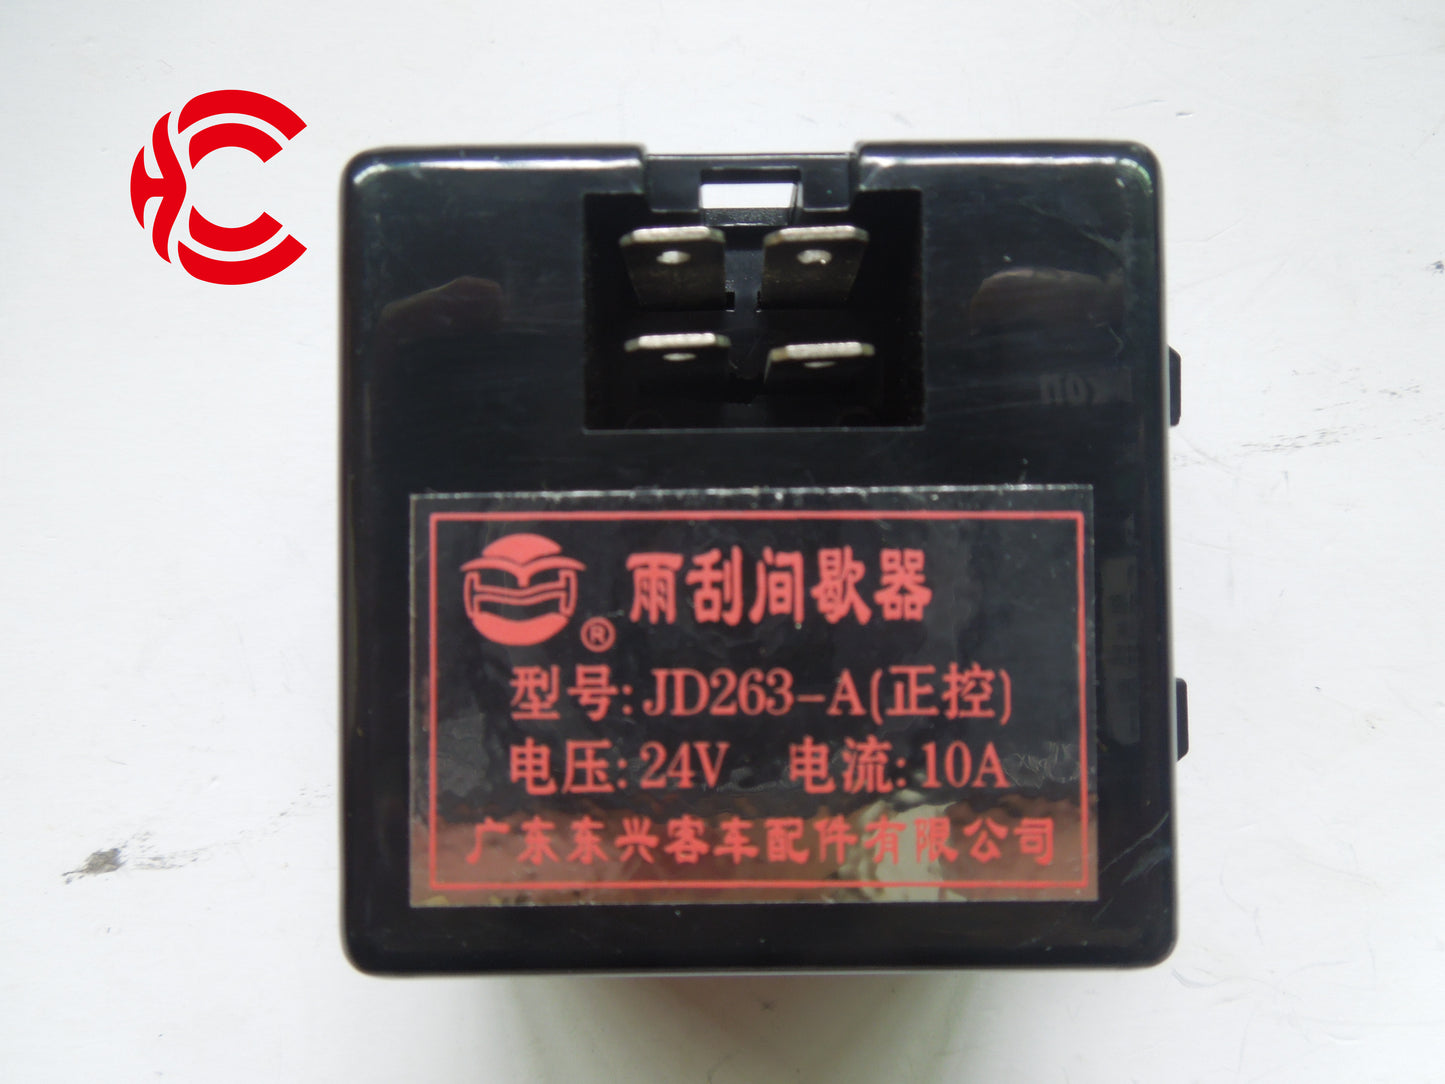 OEM: JD263-A Positive ControlMaterial: ABS Color: black Origin: Made in ChinaWeight: 50gPacking List: 1* Wiper Intermittent Relay More ServiceWe can provide OEM Manufacturing serviceWe can Be your one-step solution for Auto PartsWe can provide technical scheme for you Feel Free to Contact Us, We will get back to you as soon as possible.